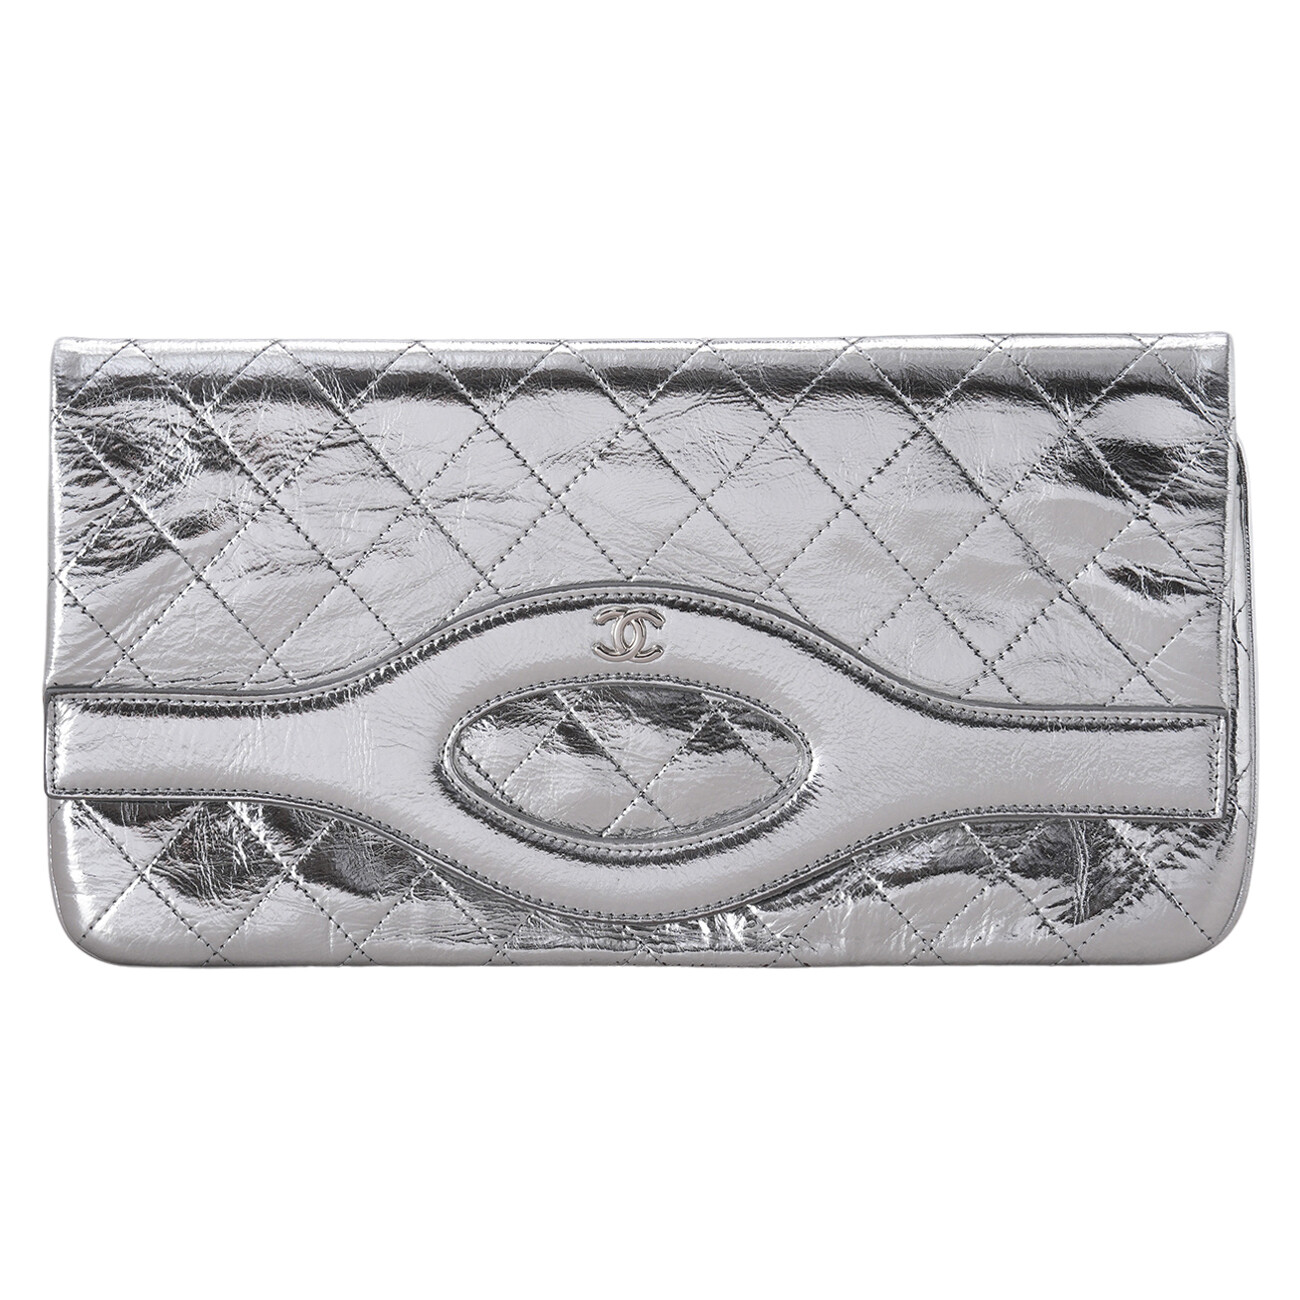 Chanel 31 Clutch, Metallic Siliver Calfskin Leather, Silver Hardware, Preowned in Box GA001P